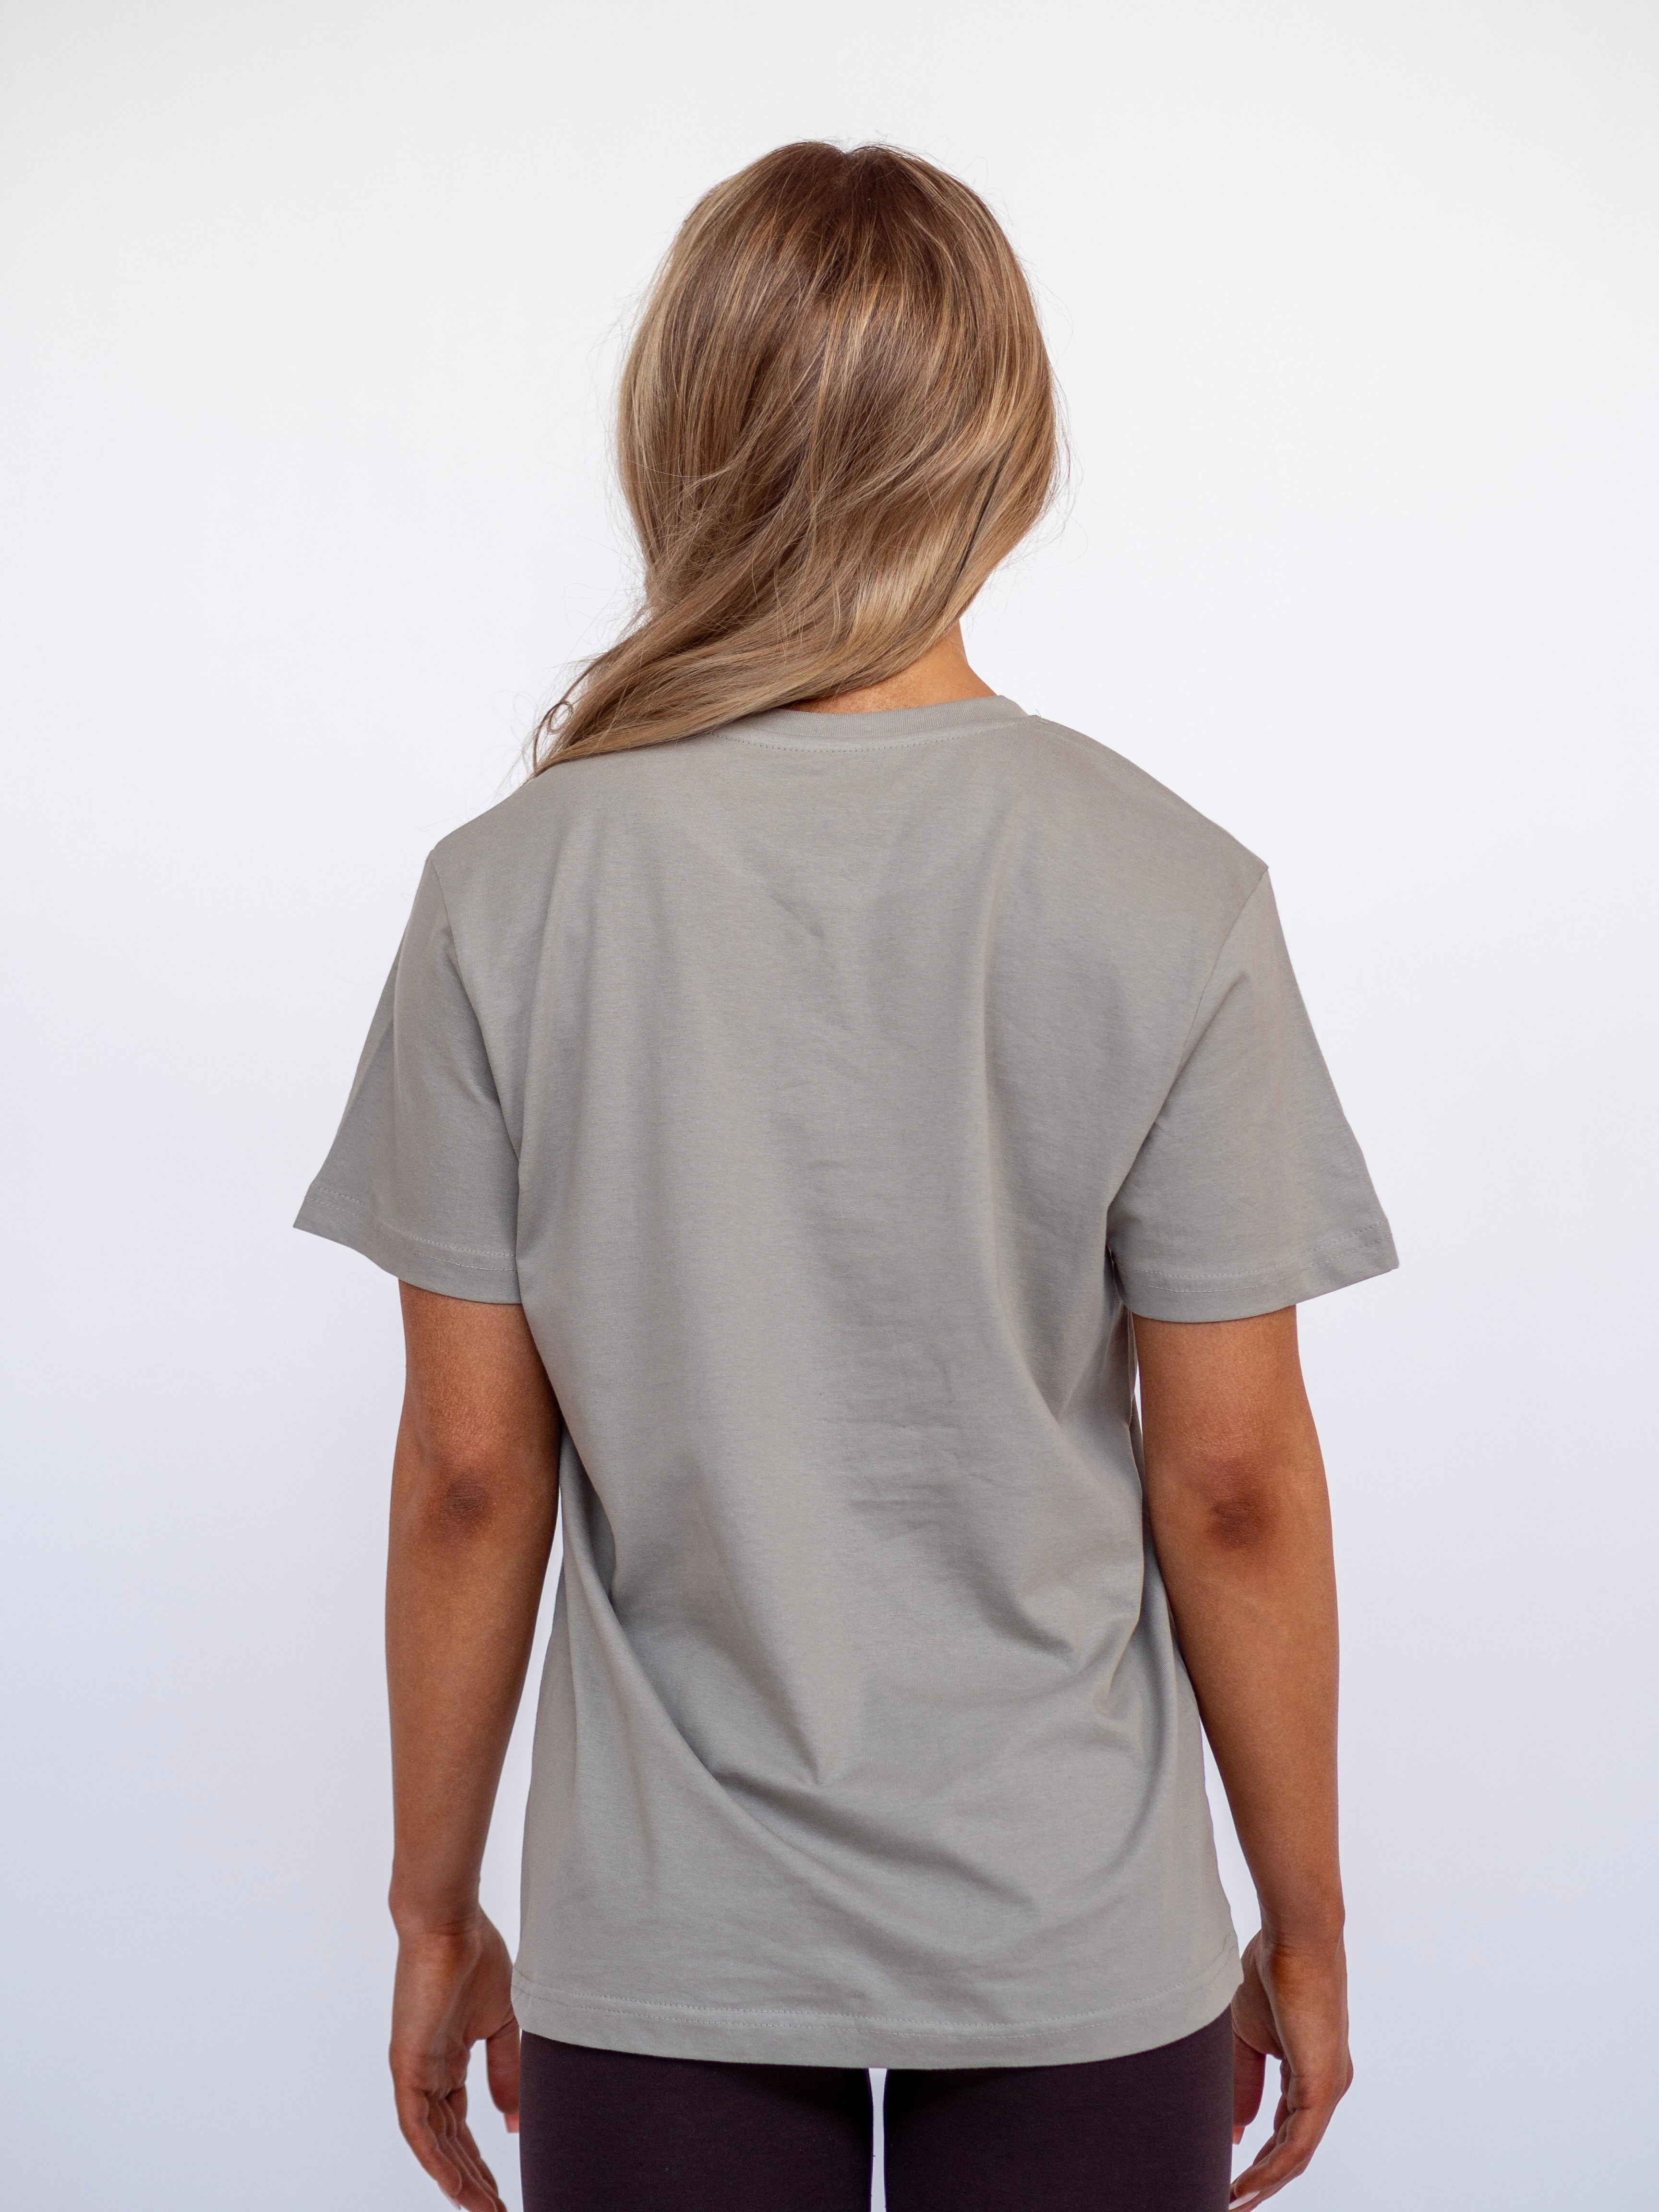 PUMP COVER OVERSIZED TEE - JERSEY MINERAL GREY